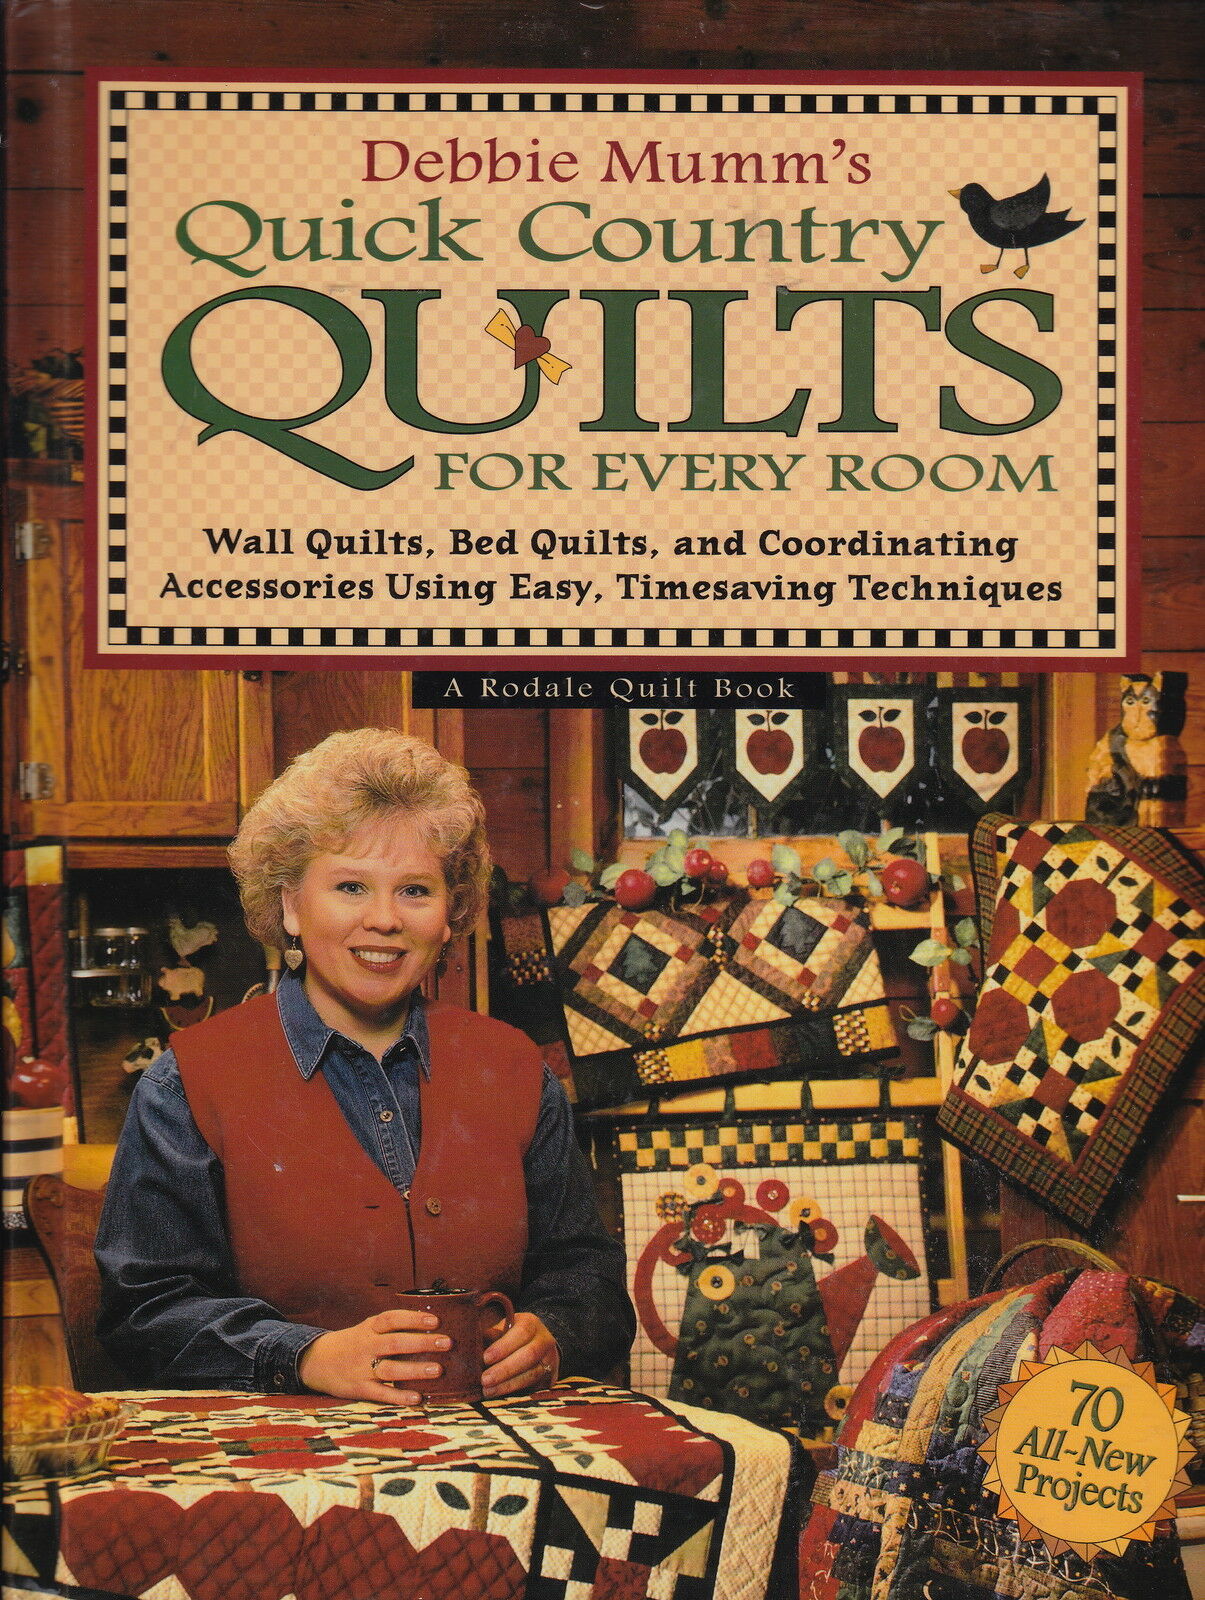 Debbie Mumm's Quick Country Quilts for Every Room A Rodale Quilt Book - $1.29